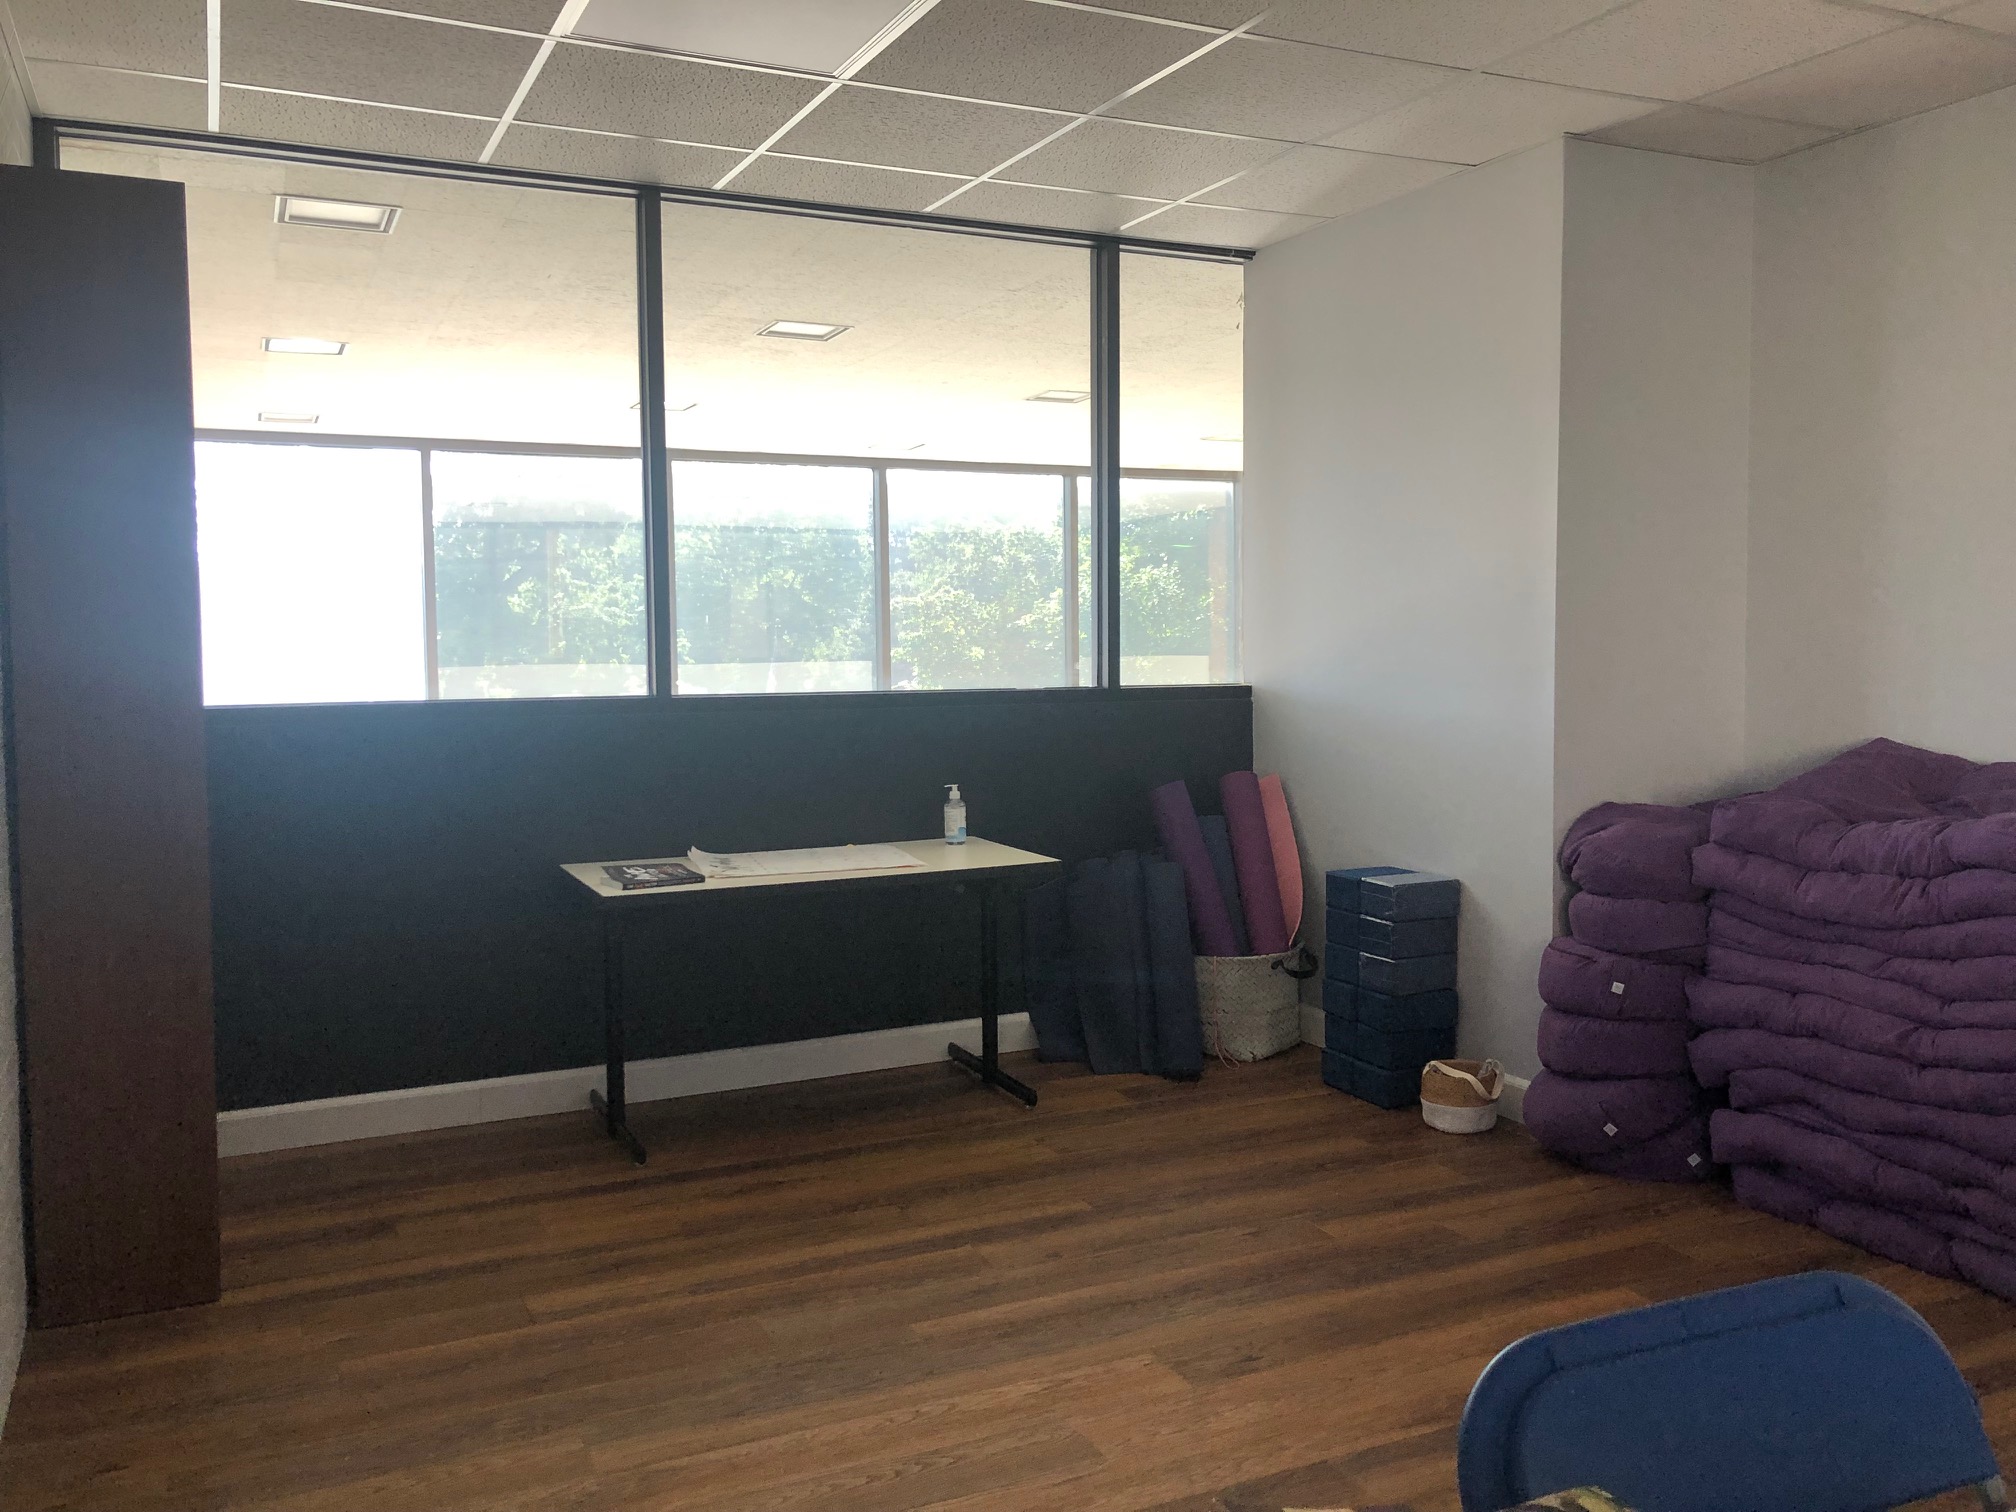 In the corner, there is a long wooden table with a single plastic water bottle on it. Along the right wall, there are stacked yoga mats and workout materials in front of a wood floor. Photo by Alyssa Buckley.